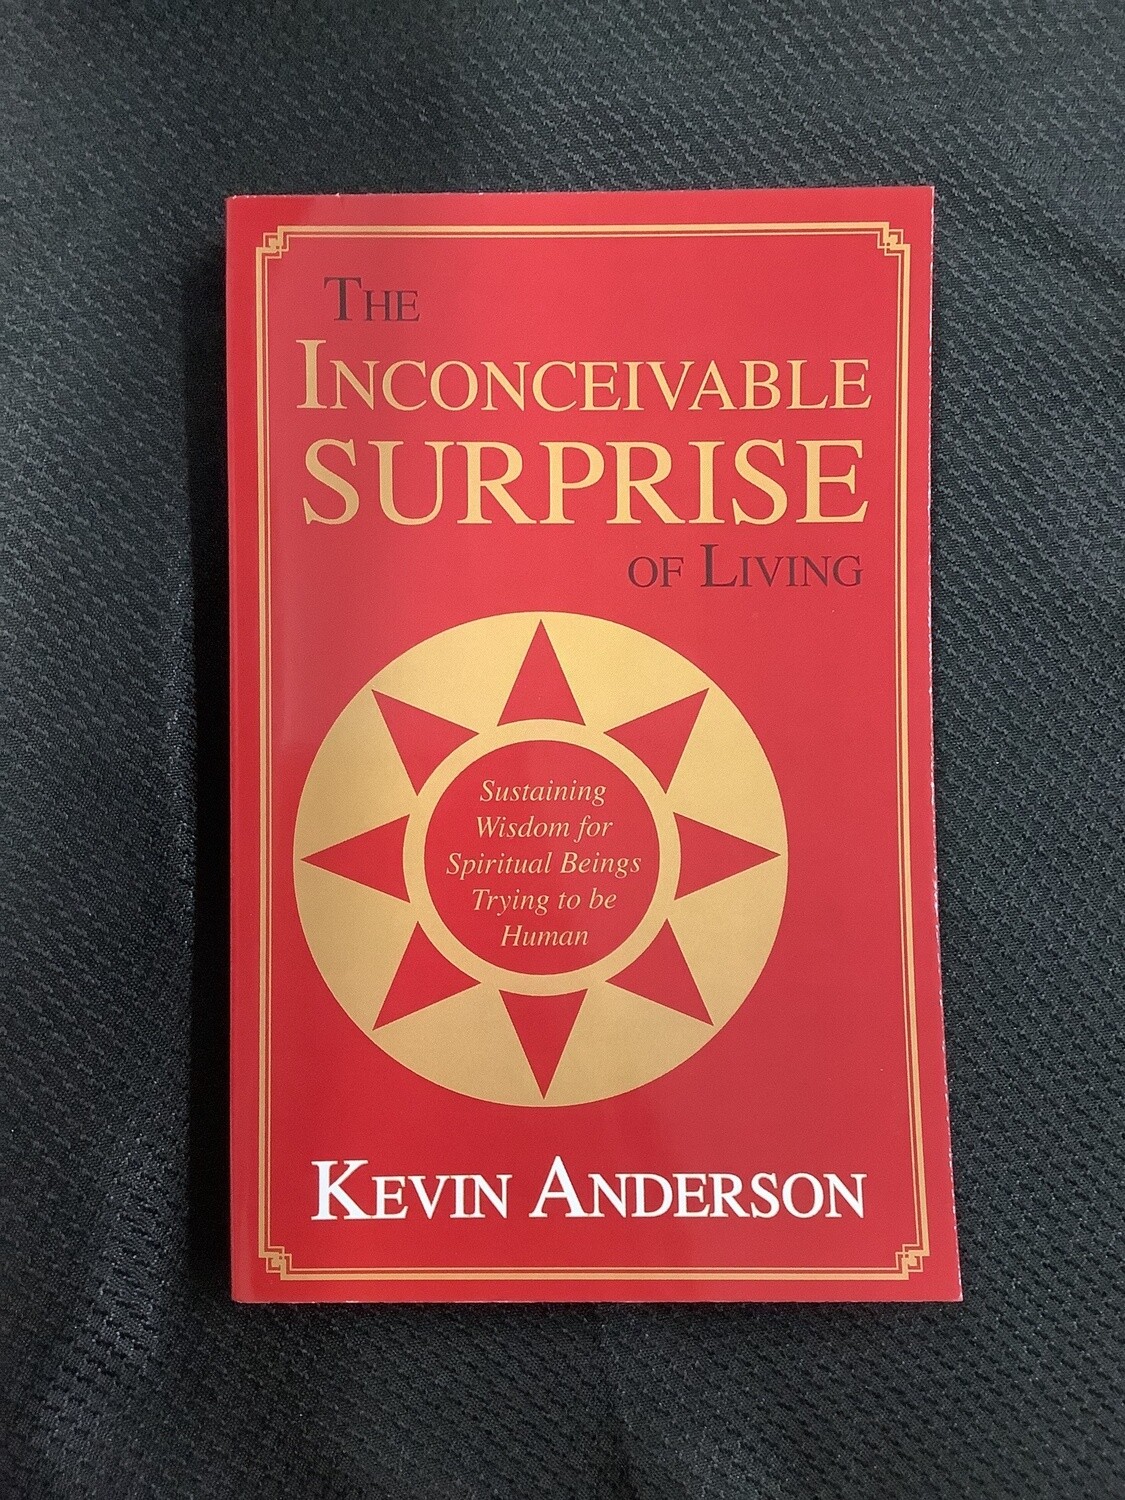 The Inconceivable Surprise Of Living Sustaining Wisdom for Spiritual Beings Trying to be Humans - Kevin Anderson